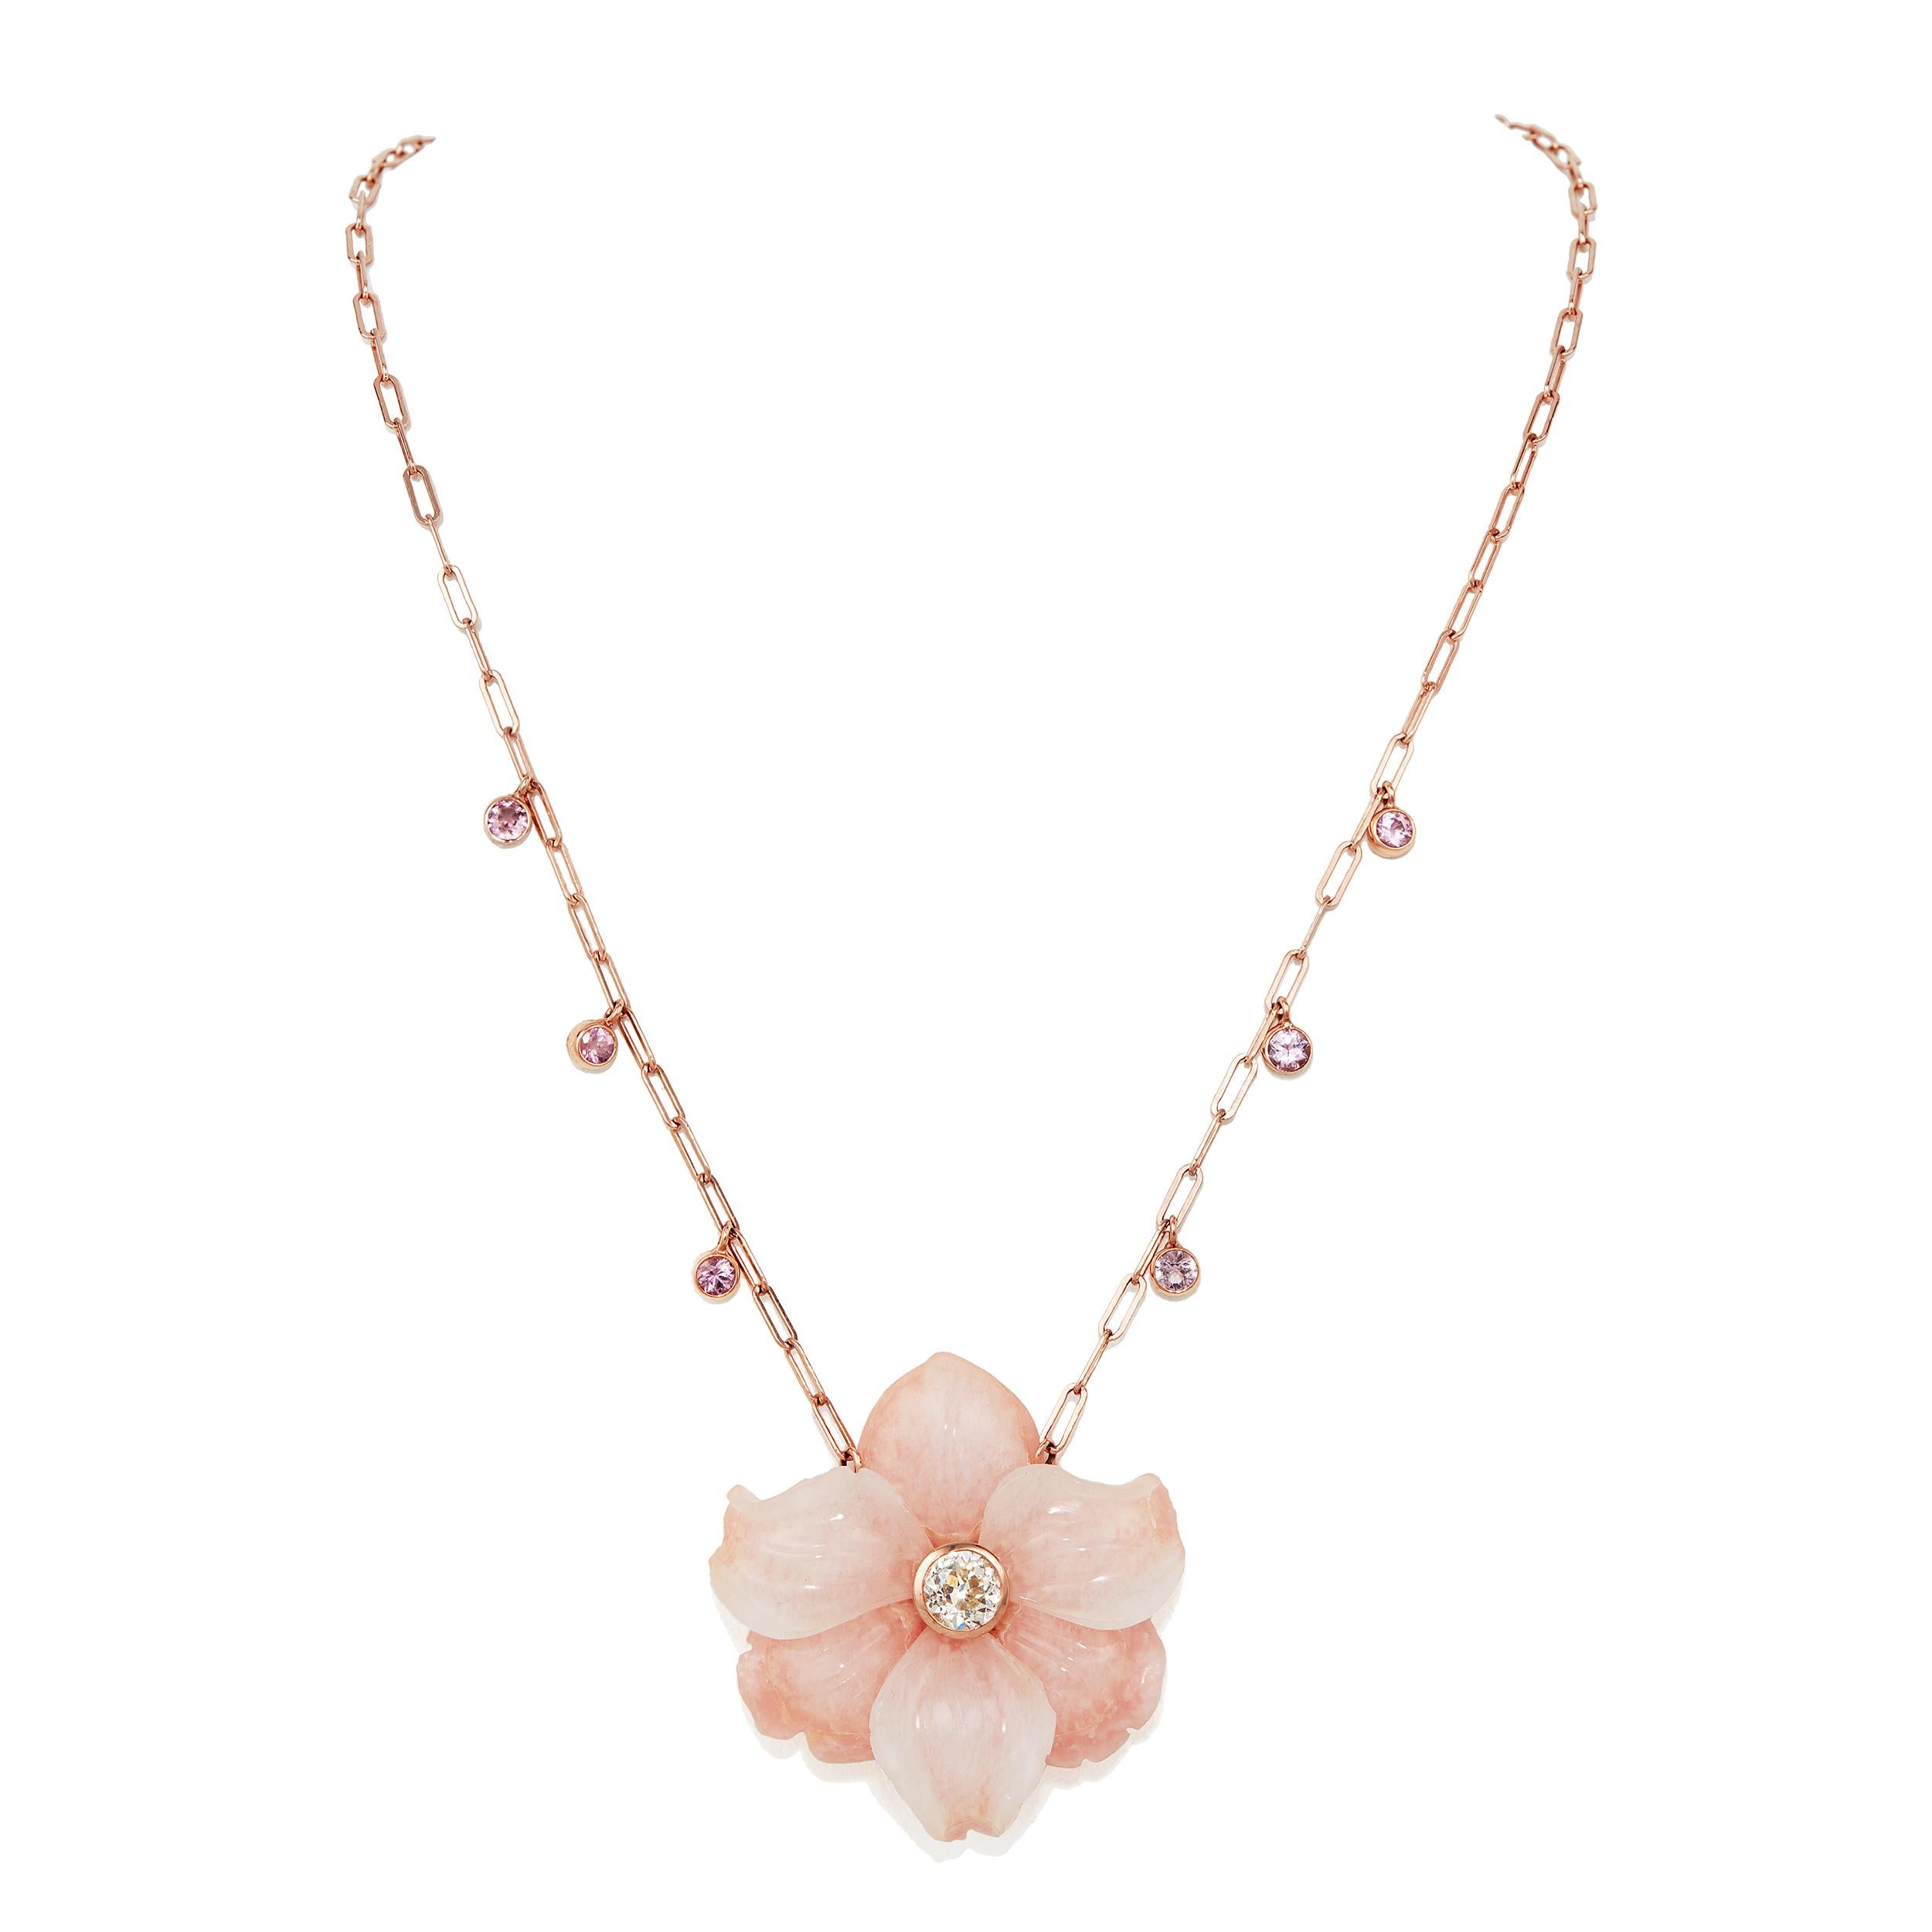 An incredible one-of-a-kind necklace that is sure to bring light and fun into any occasion! 

Round Brilliant Diamond Center Weighing 0.855 Carats

Icy Quartzite & Pink Calcite Carved Flower - 35 mm

Pink Round Faceted Spinel - 3 mm 

Carved Flower